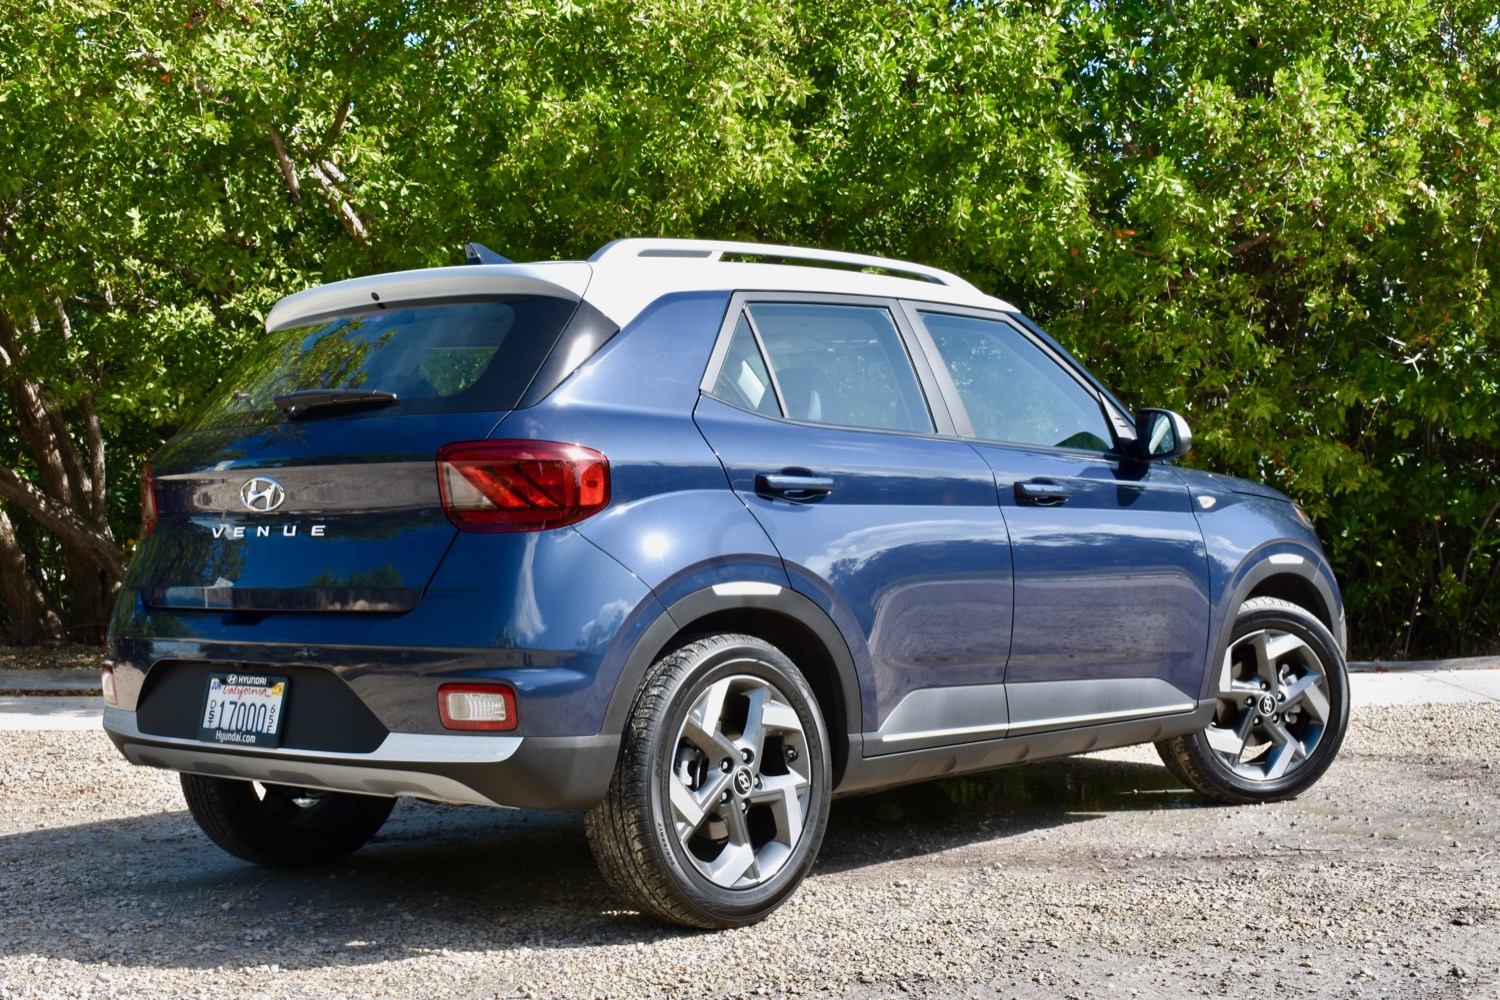 2020 Hyundai Venue First Drive Review: All The Tech For Less